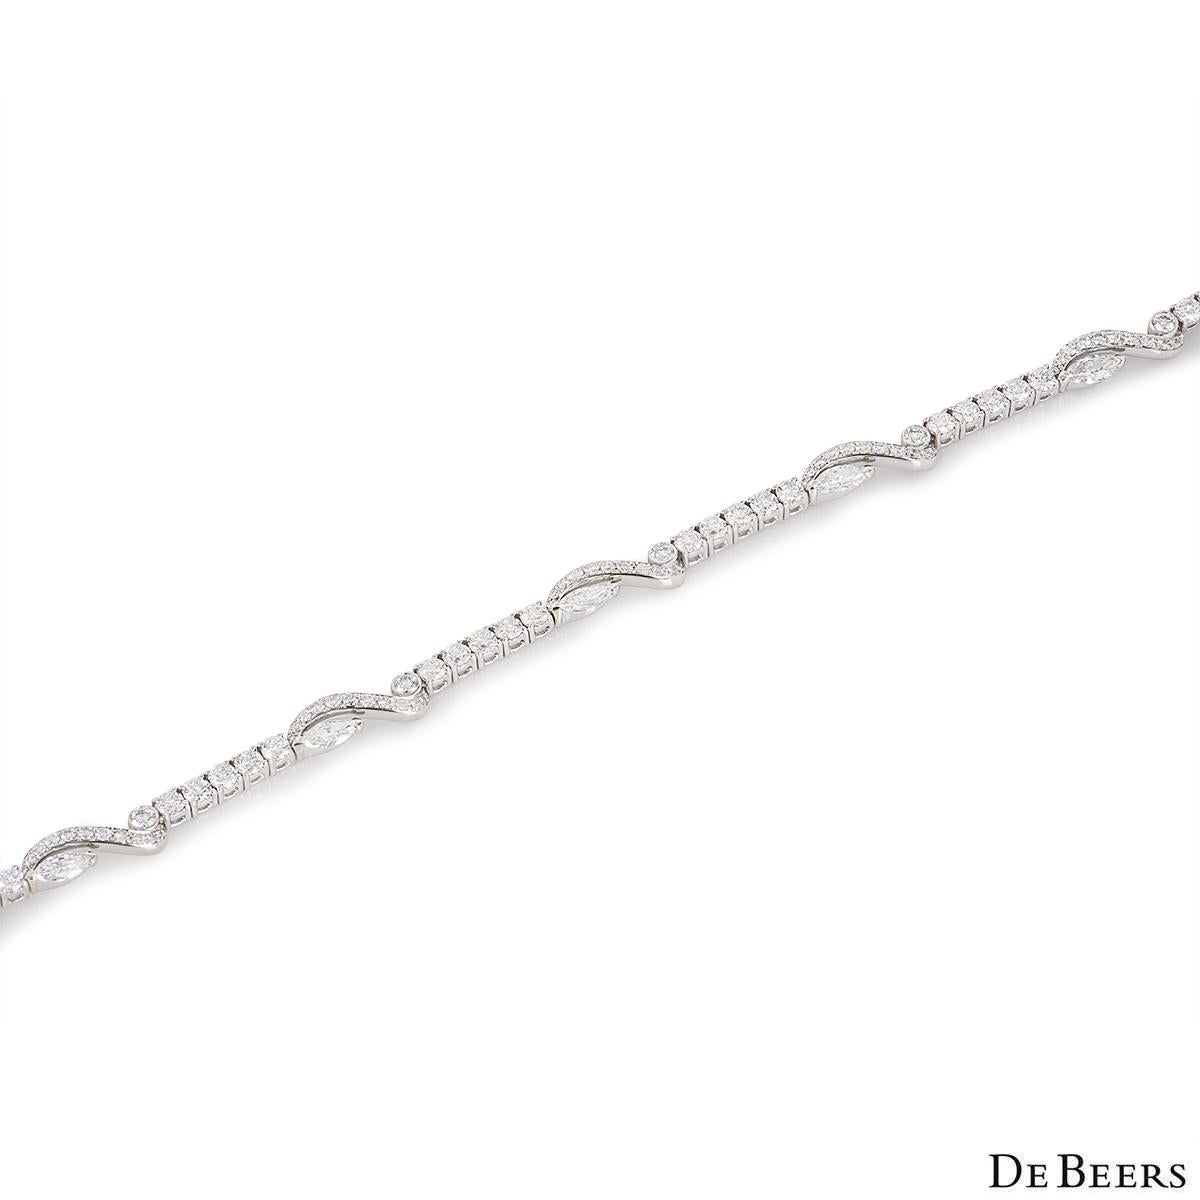 An elegant 18k white gold diamond bracelet by De Beers from the Adonis Rose collection B1021570018. The one line bracelet is set with 5 marquise cut and  86 round brilliant cut diamonds with an approximate weight of 5.35ct, E-F colour and VS